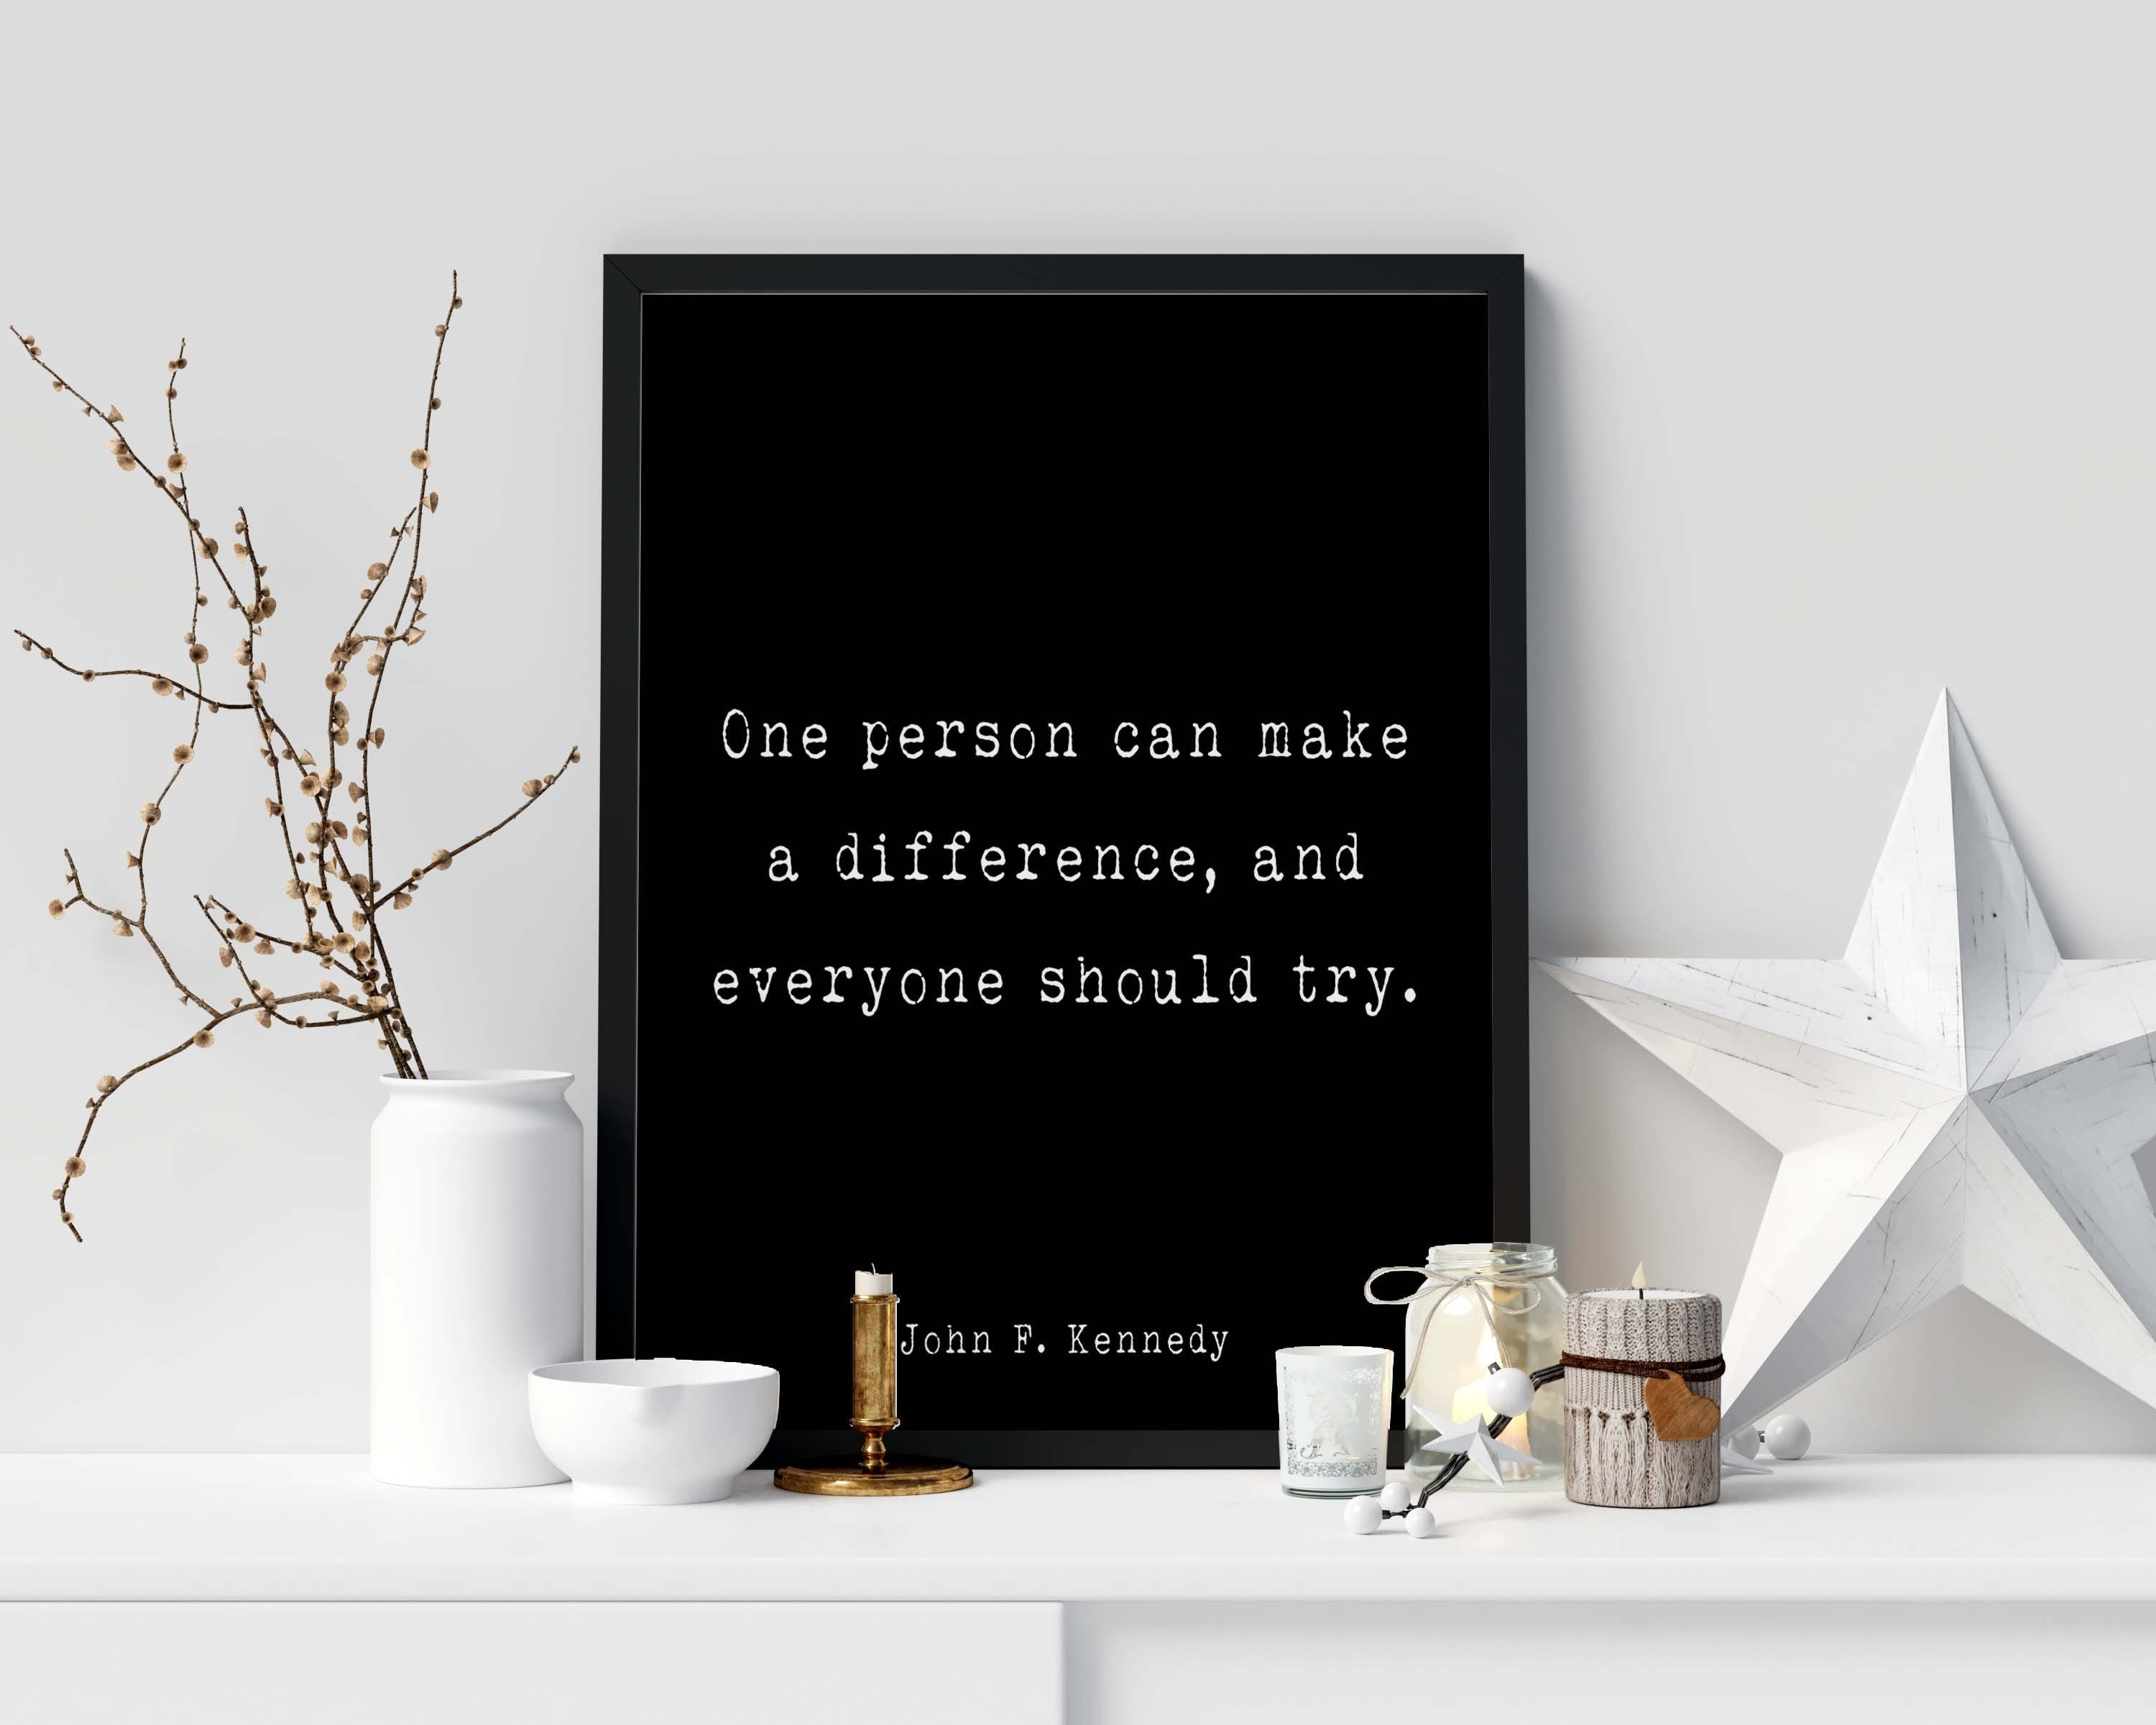 John F. Kennedy Presidential Quote Print, JFK One Person Can Make A Difference